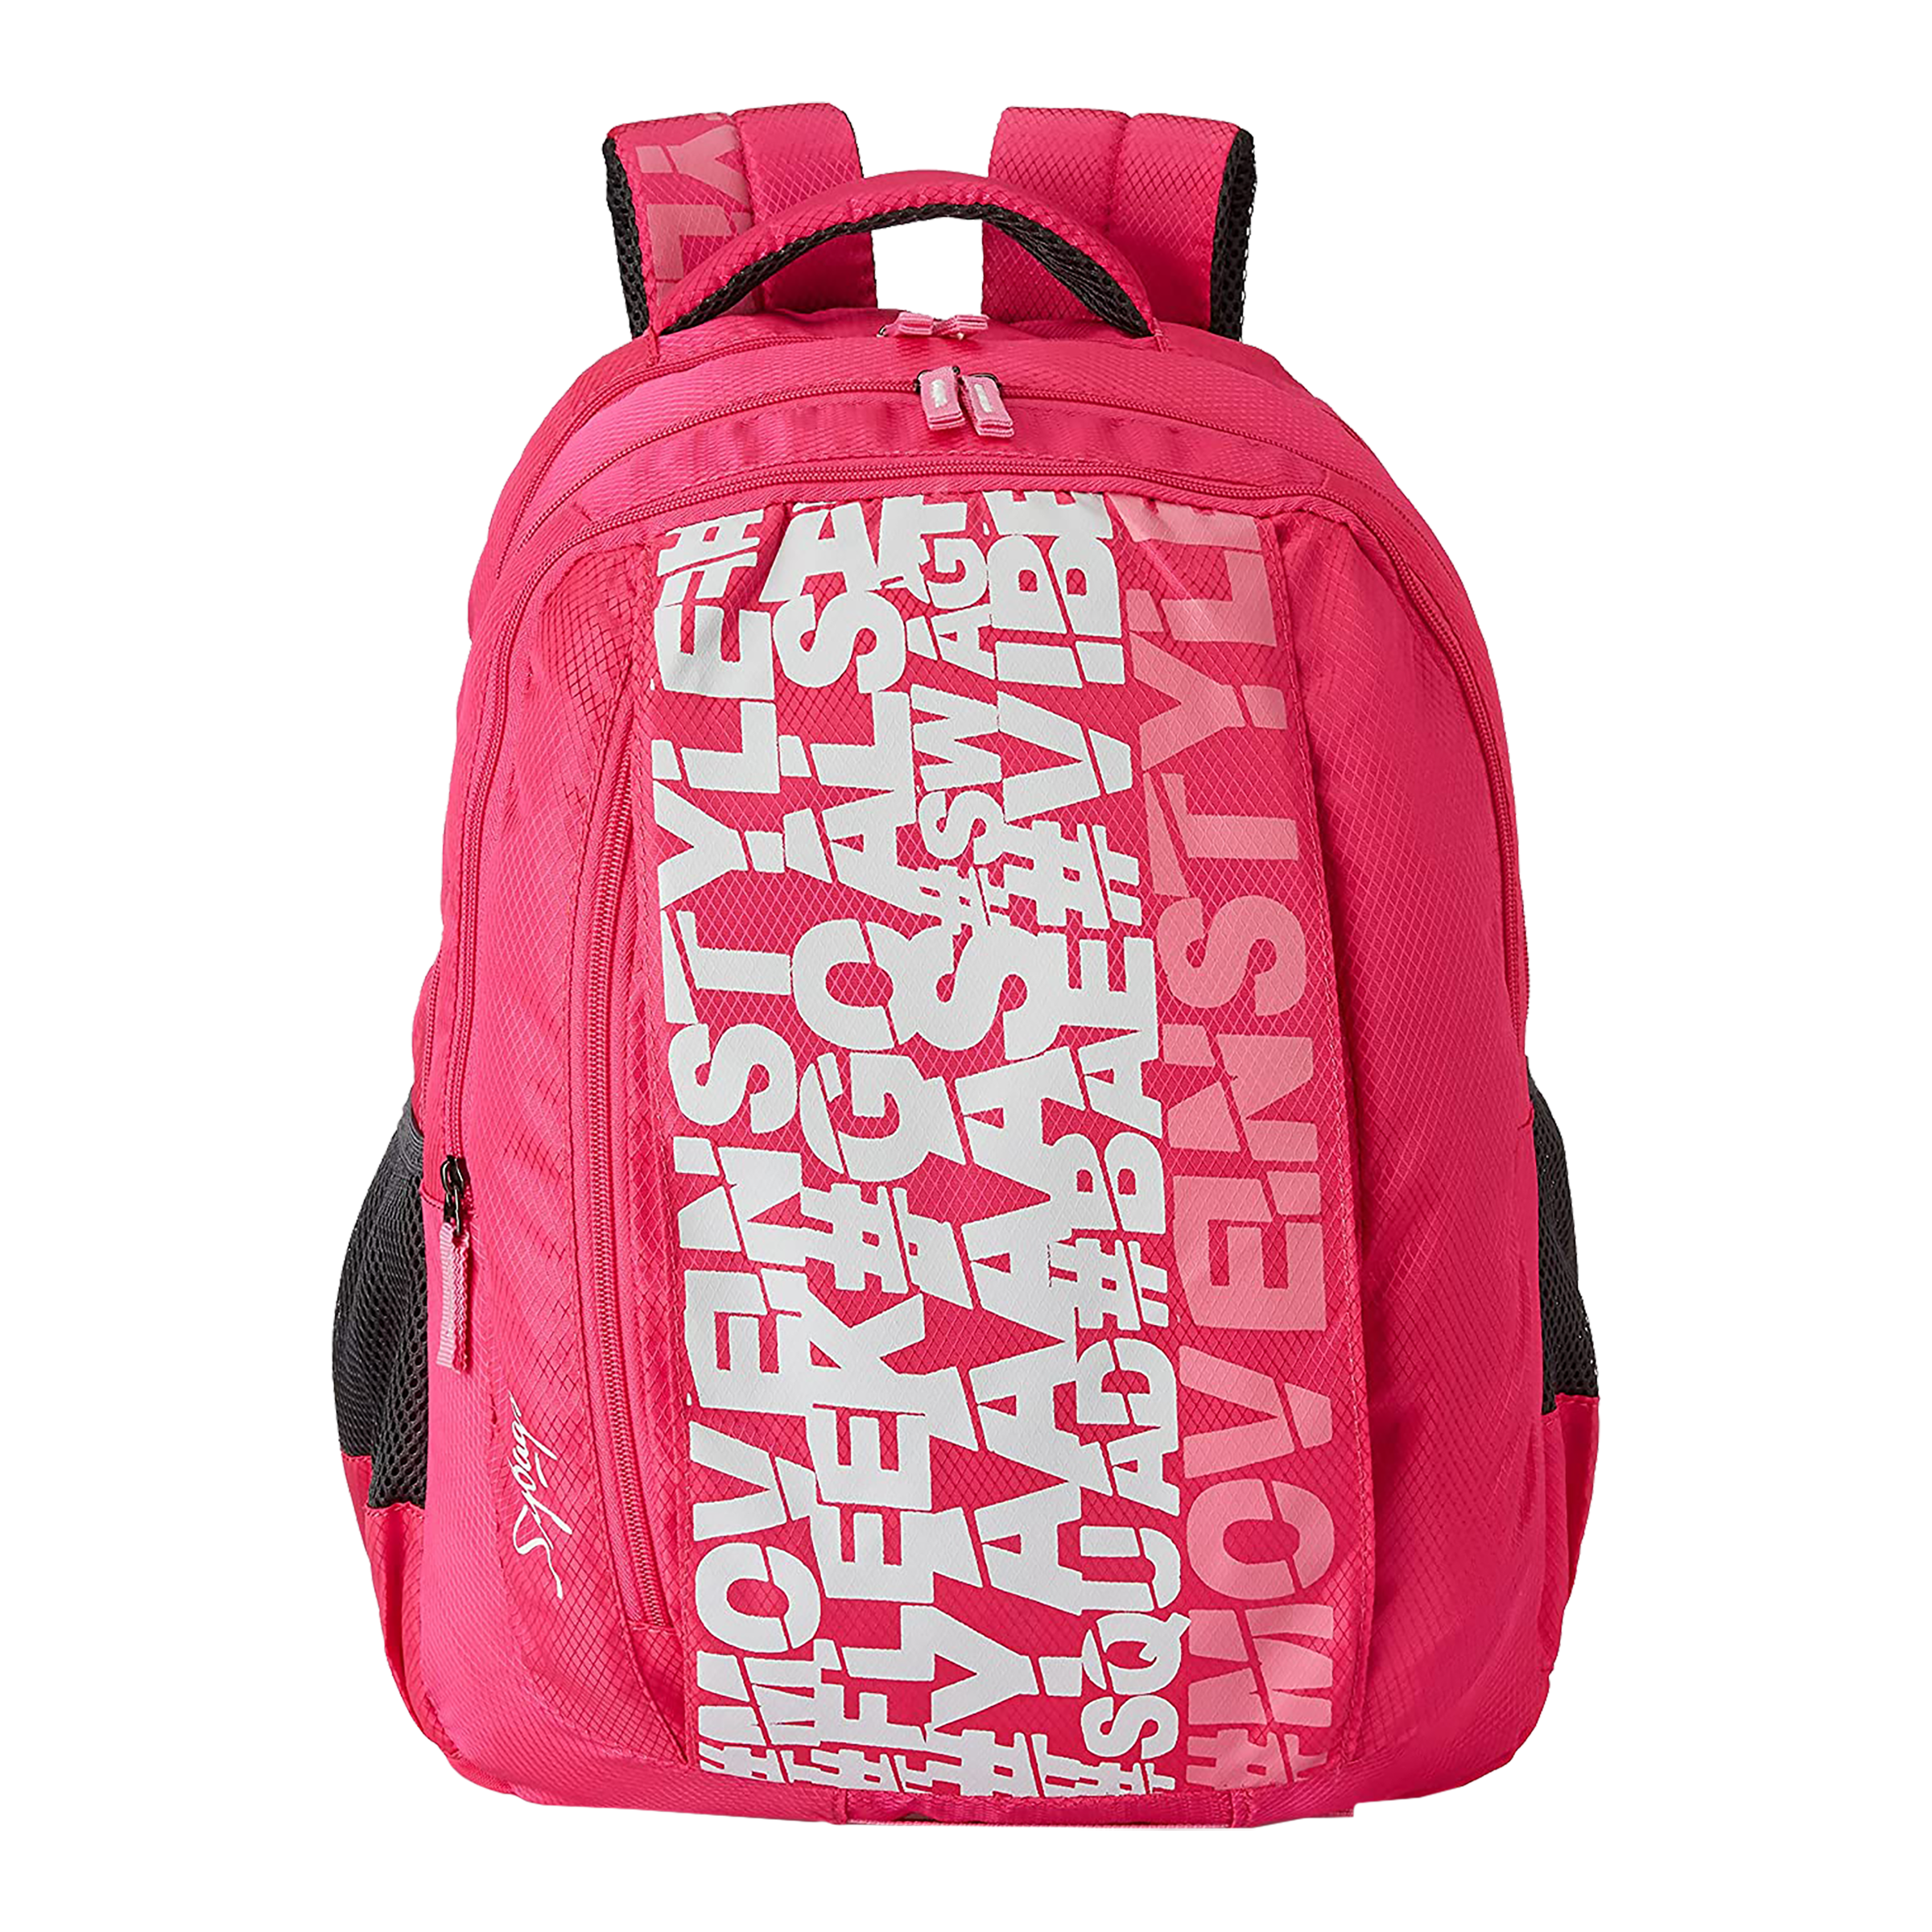 Skybags New Neon 30 Litres Polyester Backpack (3 Compartments, BPNNE14HPNK, Pink)